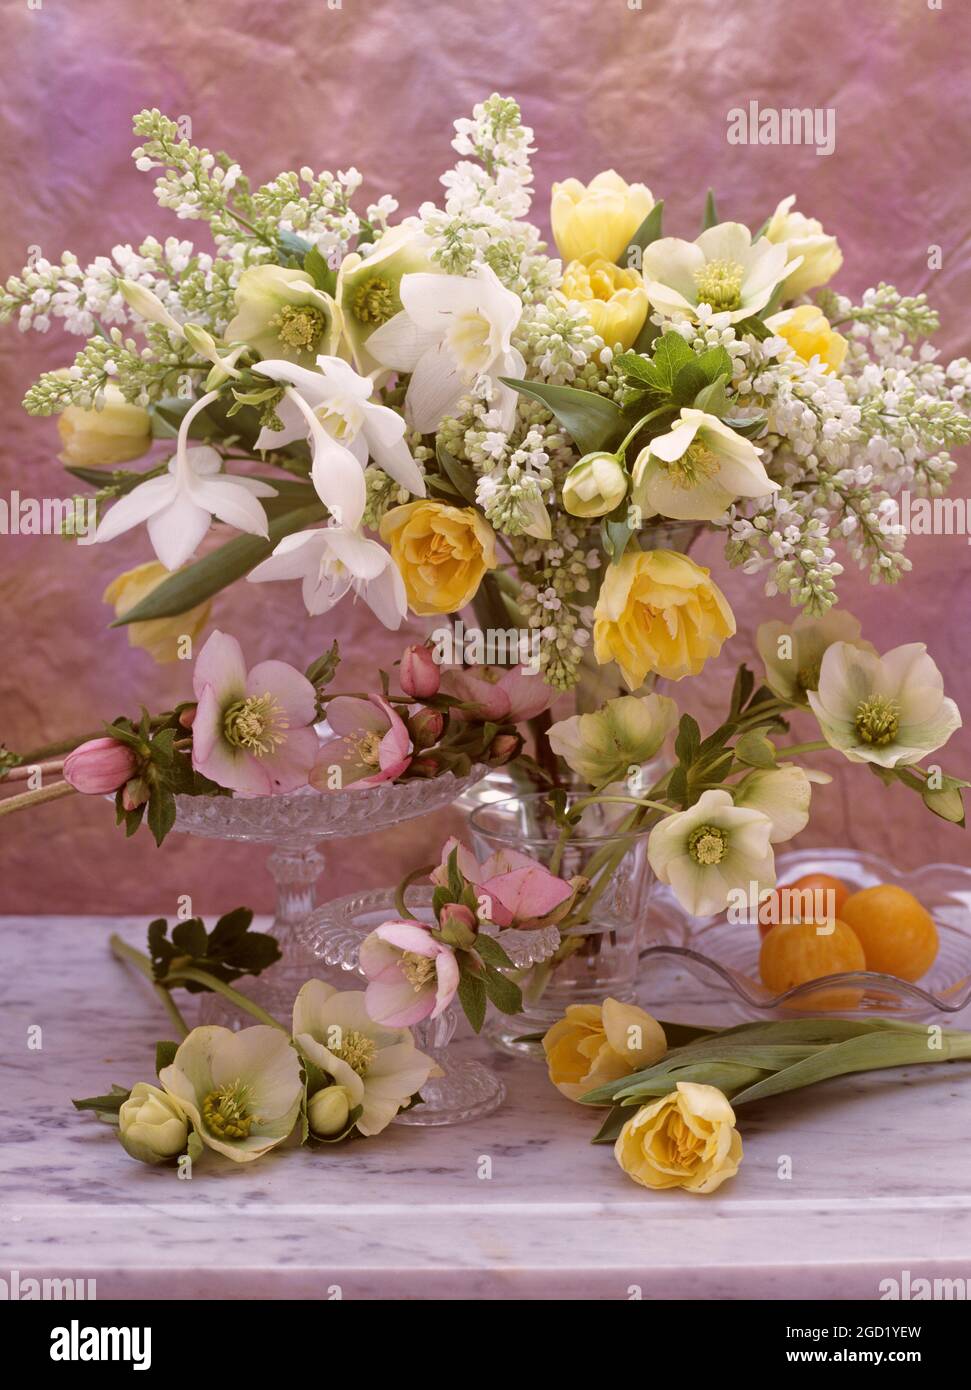 botanik, Tulpen, Hellebores, ADDITIONAL-RIGHTS-CLEARANCE-INFO-NOT-AVAILABLE Stockfoto